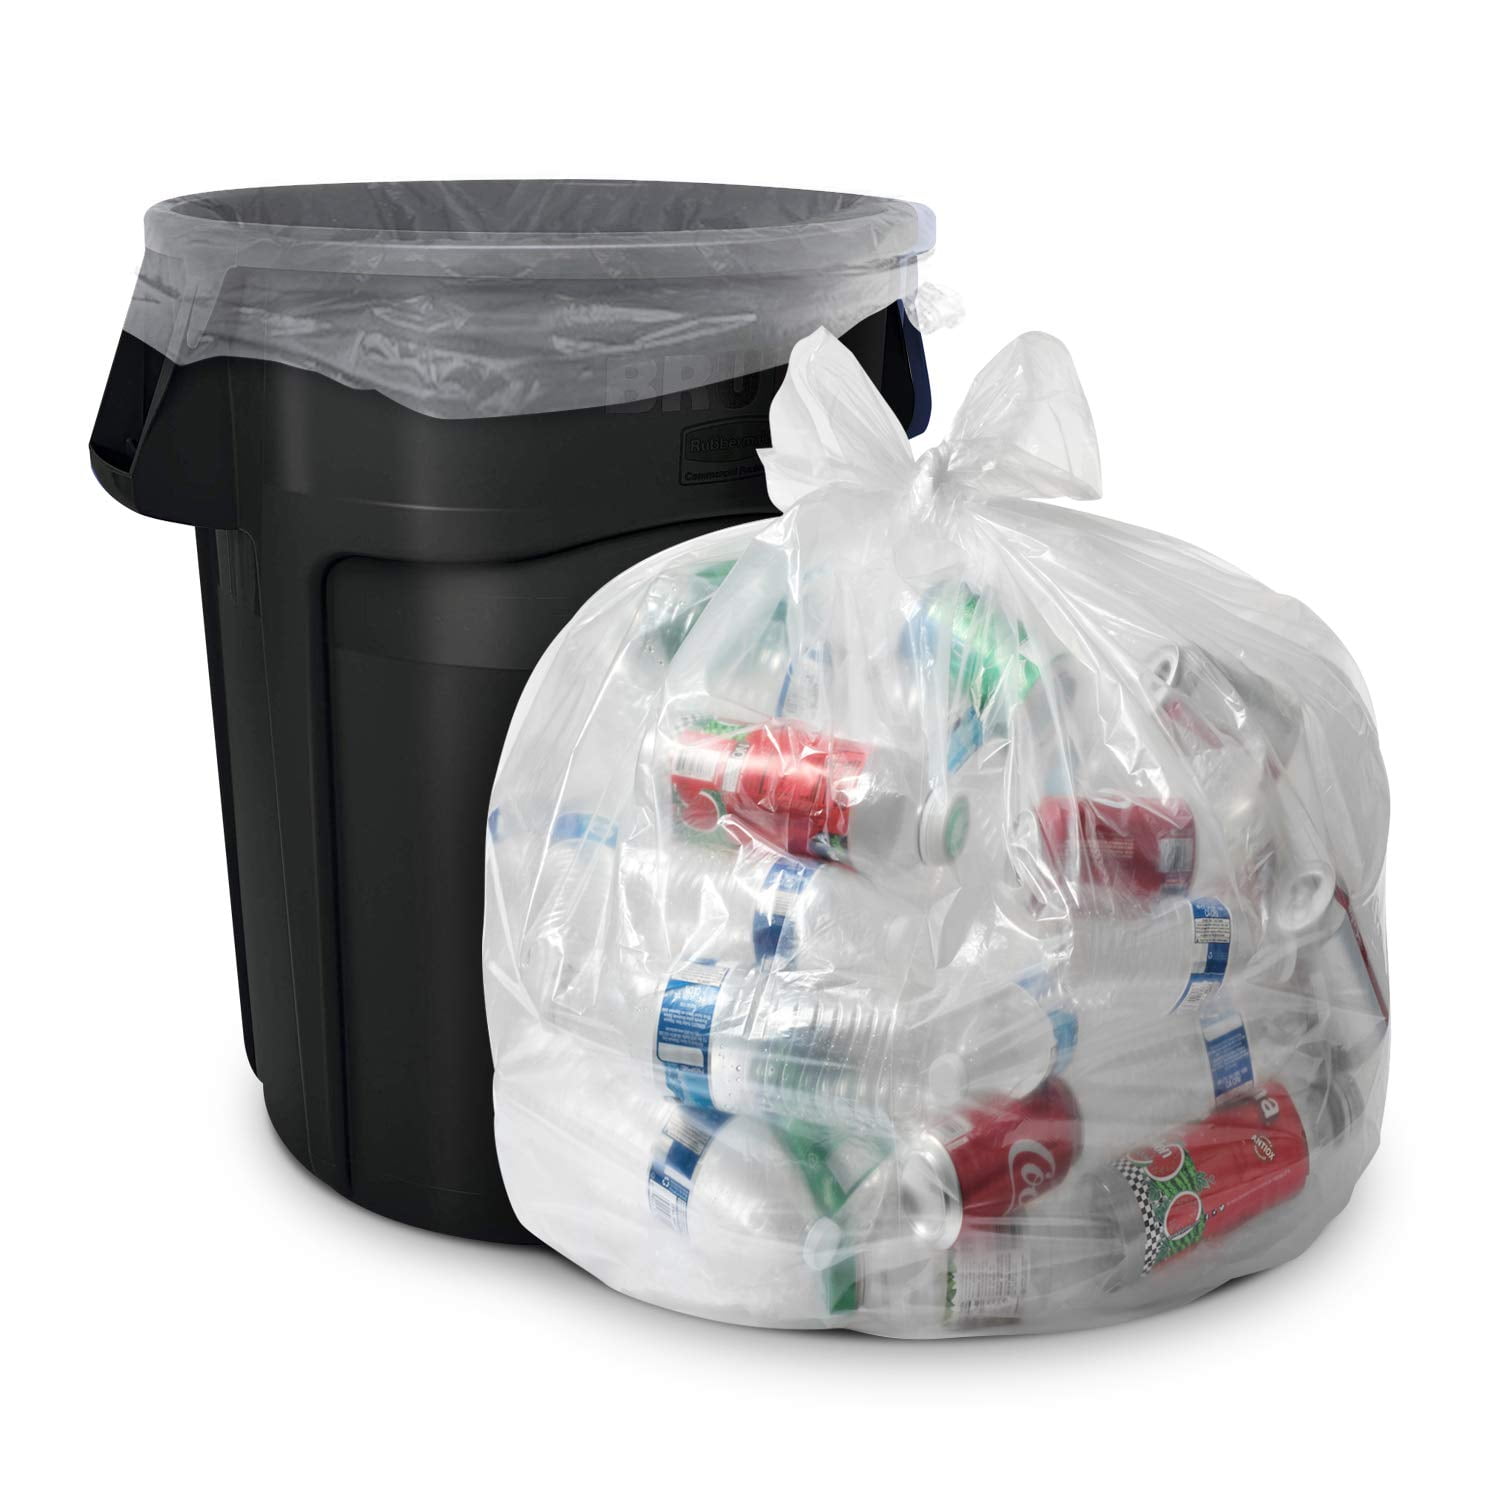 Aluf Plastics 55 Gallon Clear Trash Bags - (Huge 100 Pack) - 38 x 58 -  1.5 MIL (Eq) - CSR Series - Heavy Duty Indtrial Liners Clear Garbage Bags  for Recycling, Contractors, Storage, Outdoor 